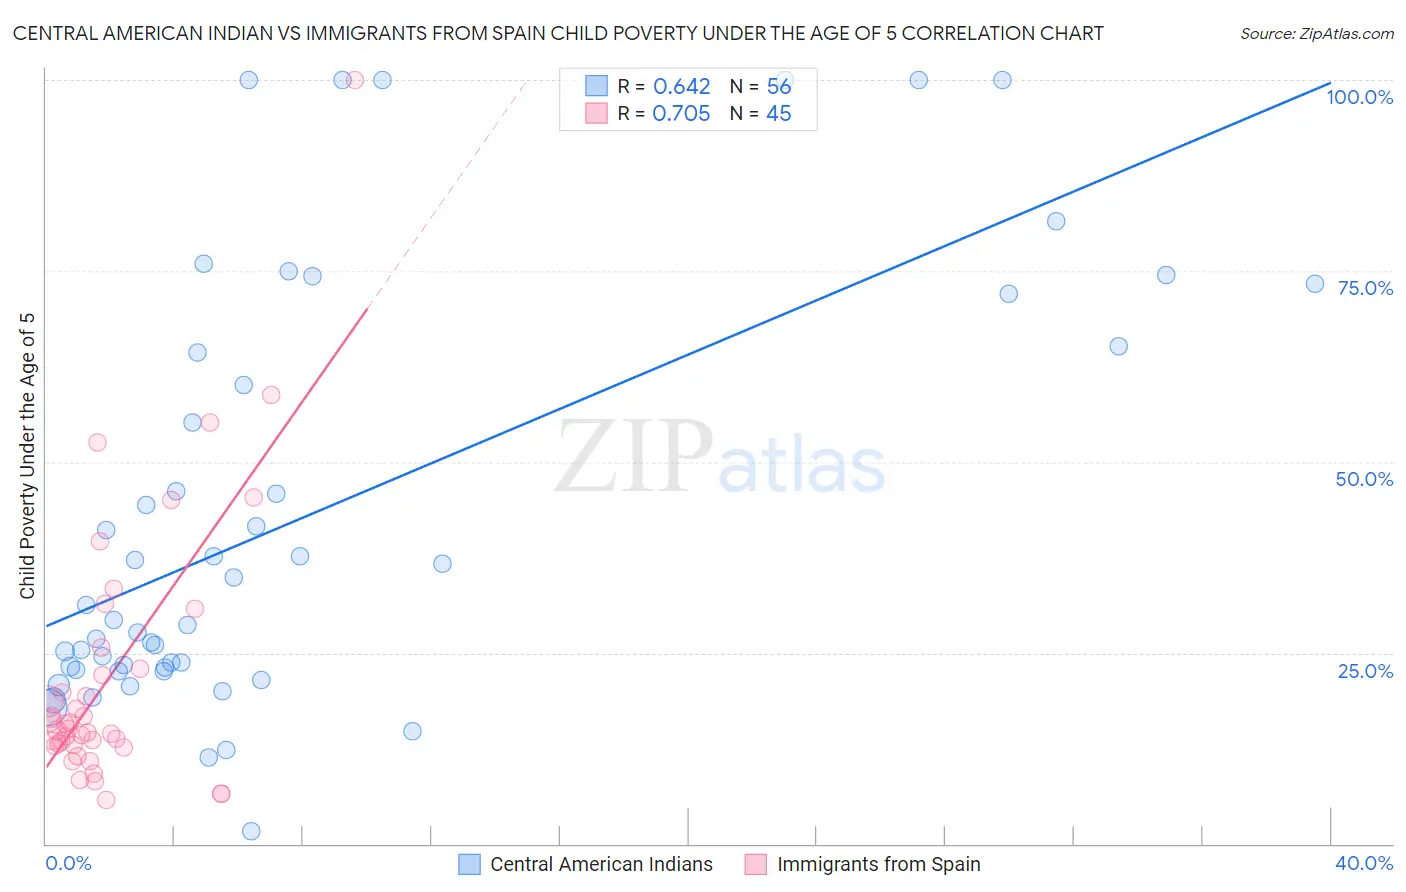 Central American Indian vs Immigrants from Spain Child Poverty Under the Age of 5